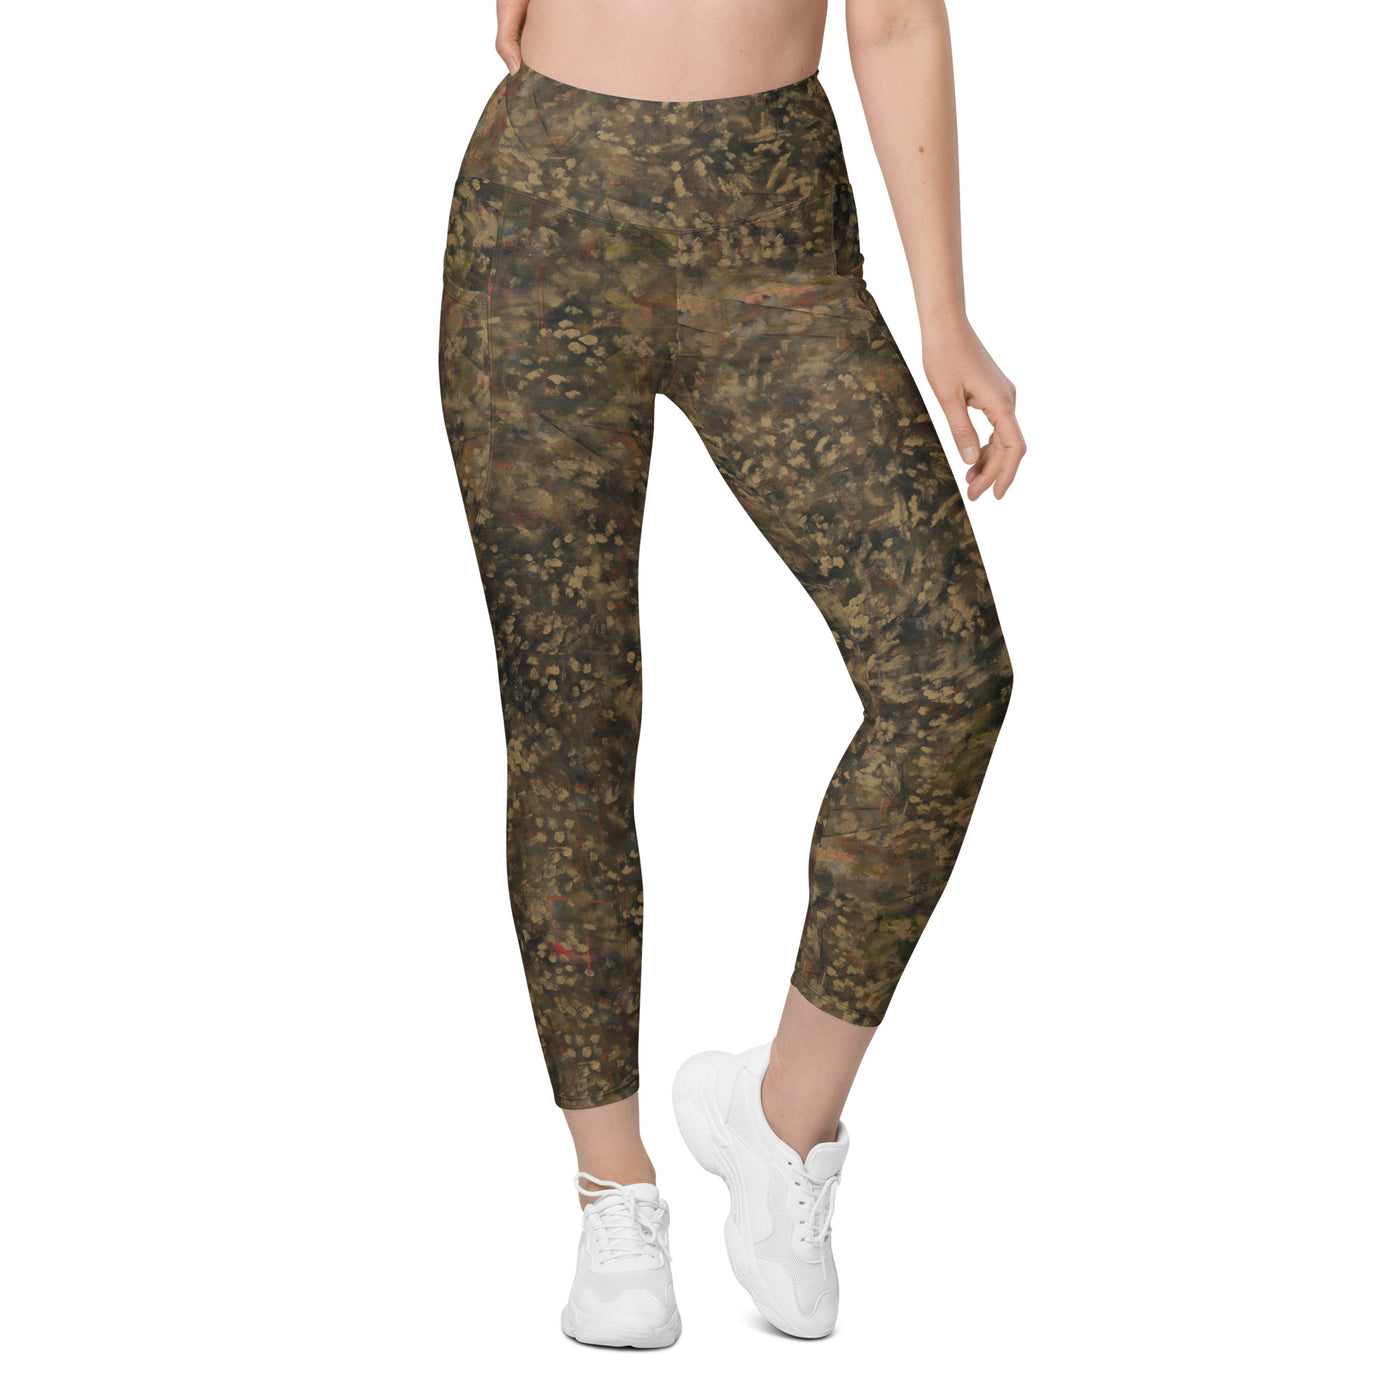 Courage Art Leggings with pockets